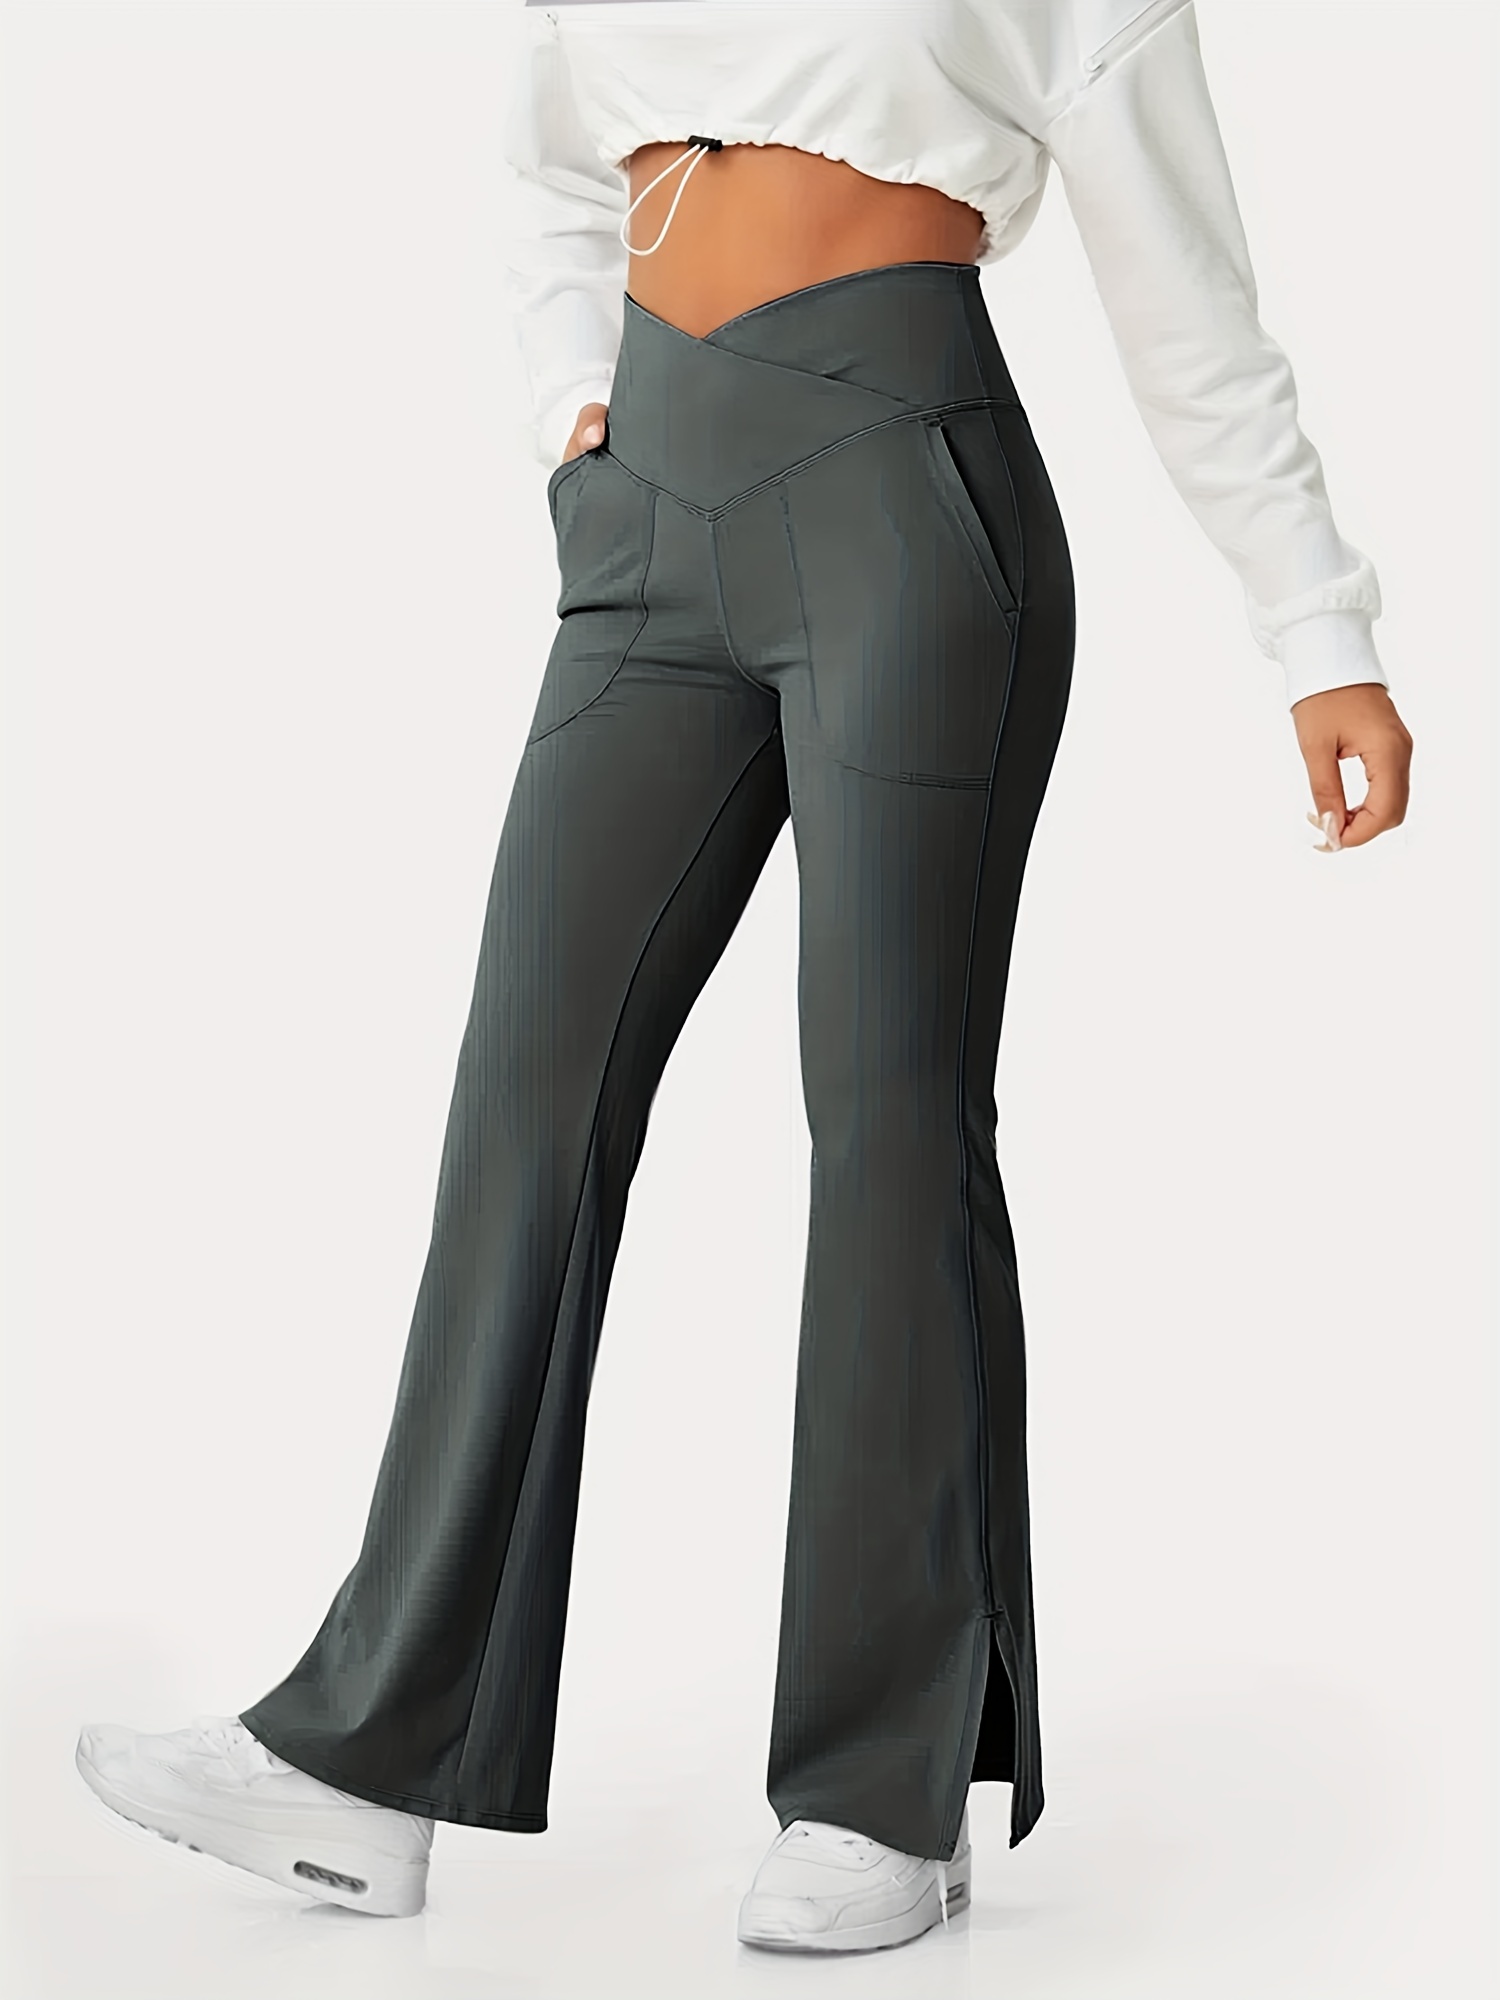 Women's Flared Pants with Pockets, Flared Leg Yoga Pants High